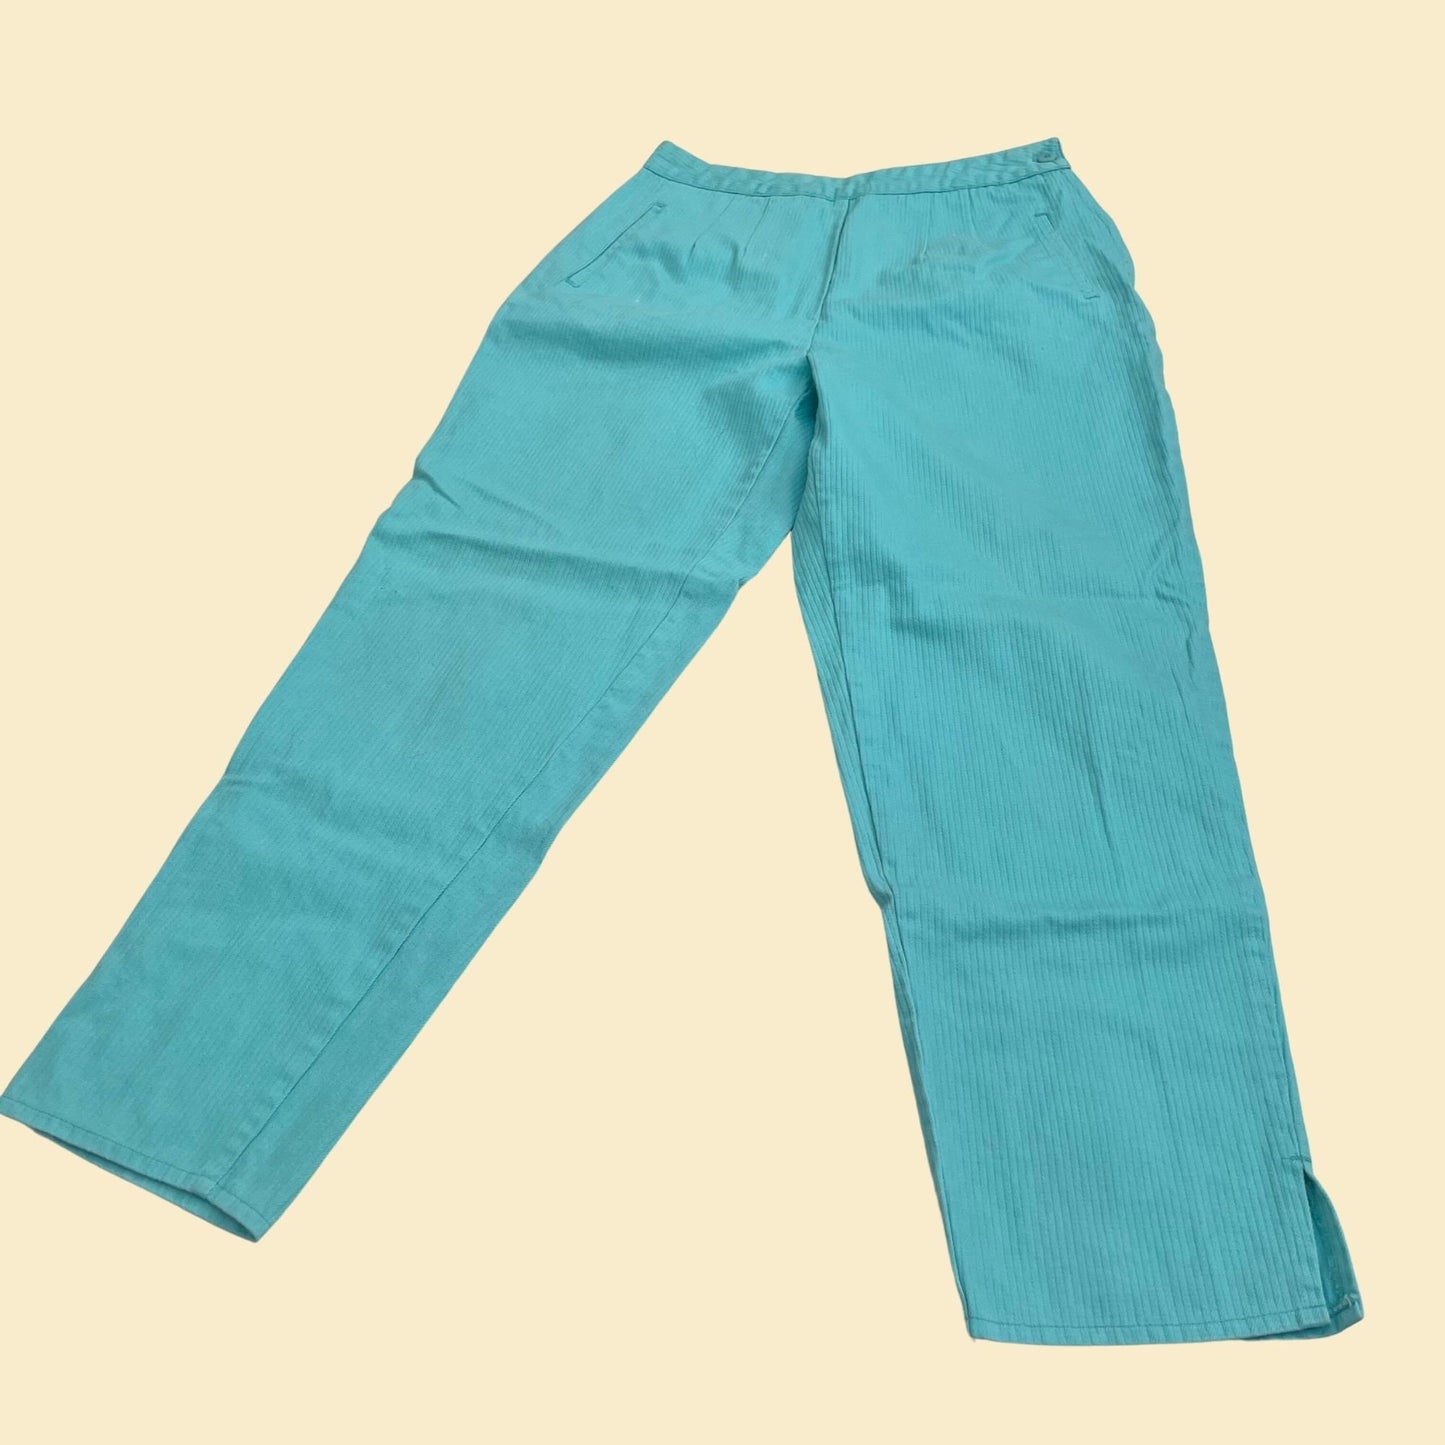 80s teal pants by Organically Grown, vintage side zip size 13 ribbed jeans, turquoise women's 1980s pants